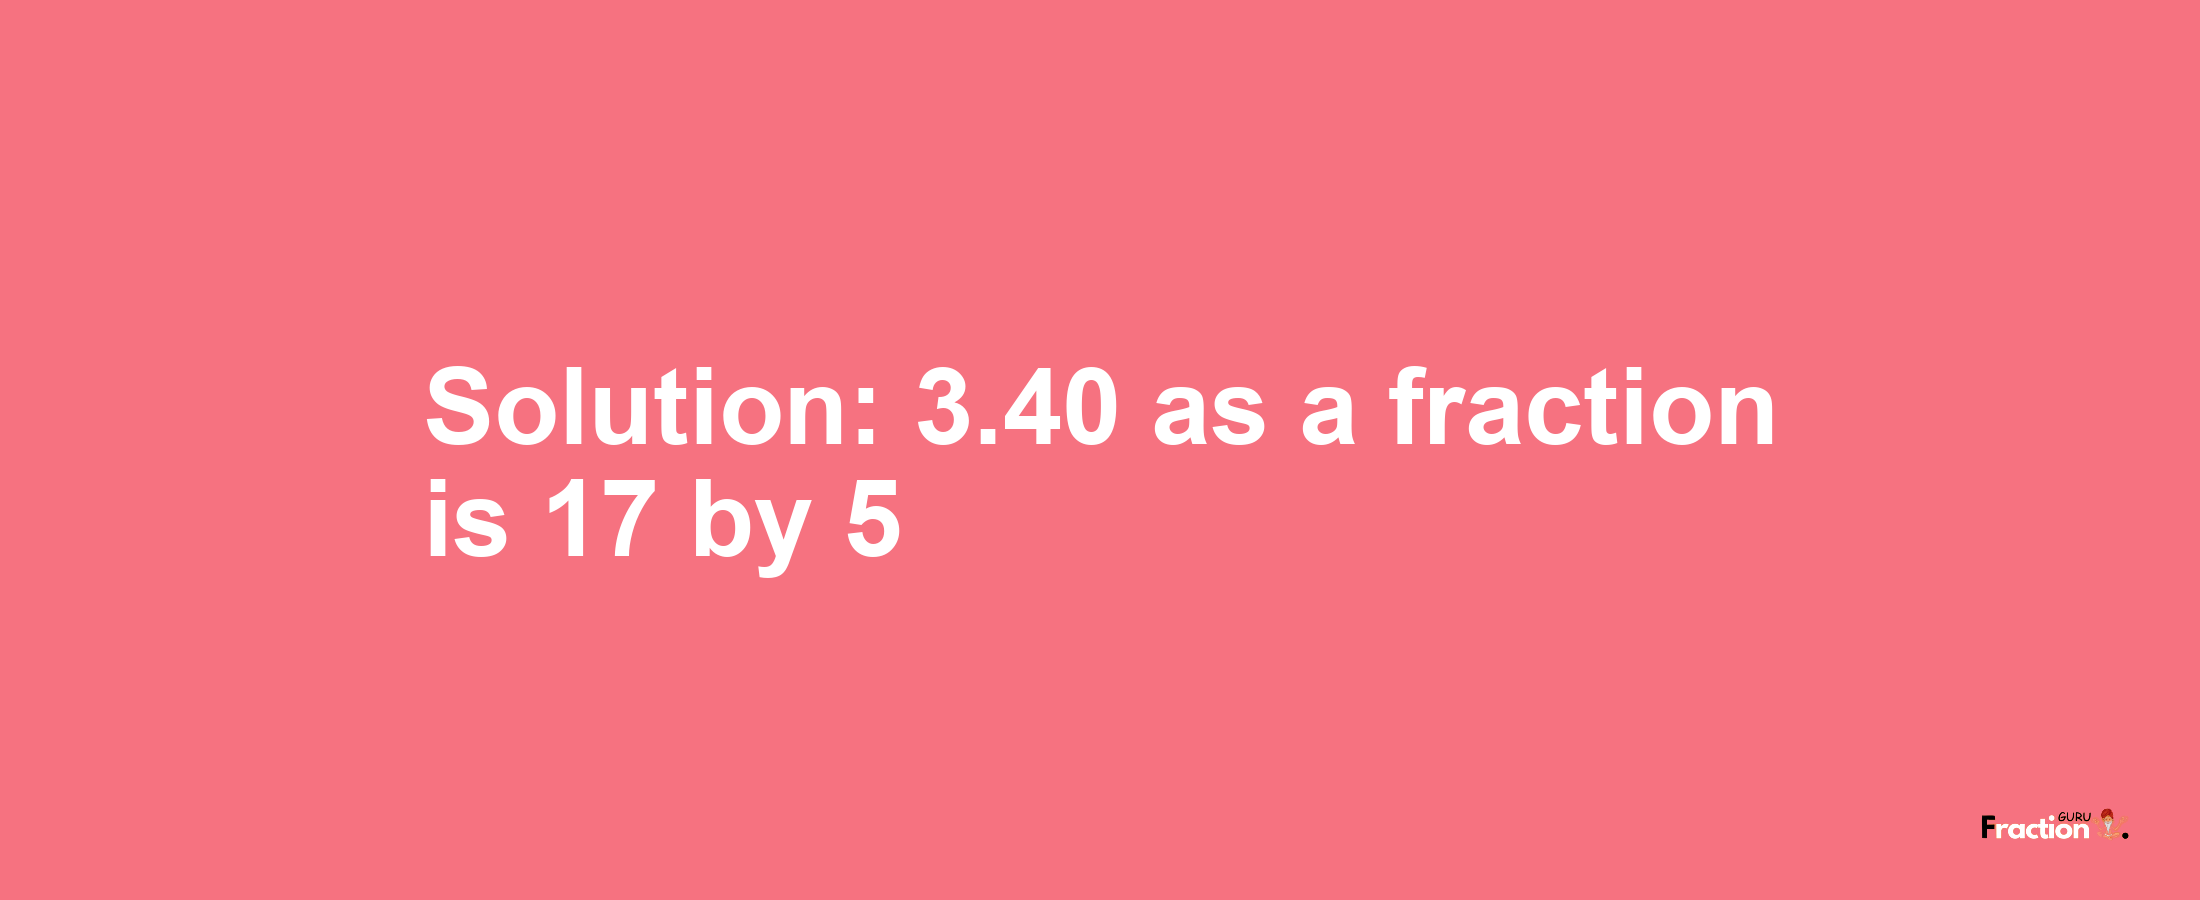 Solution:3.40 as a fraction is 17/5